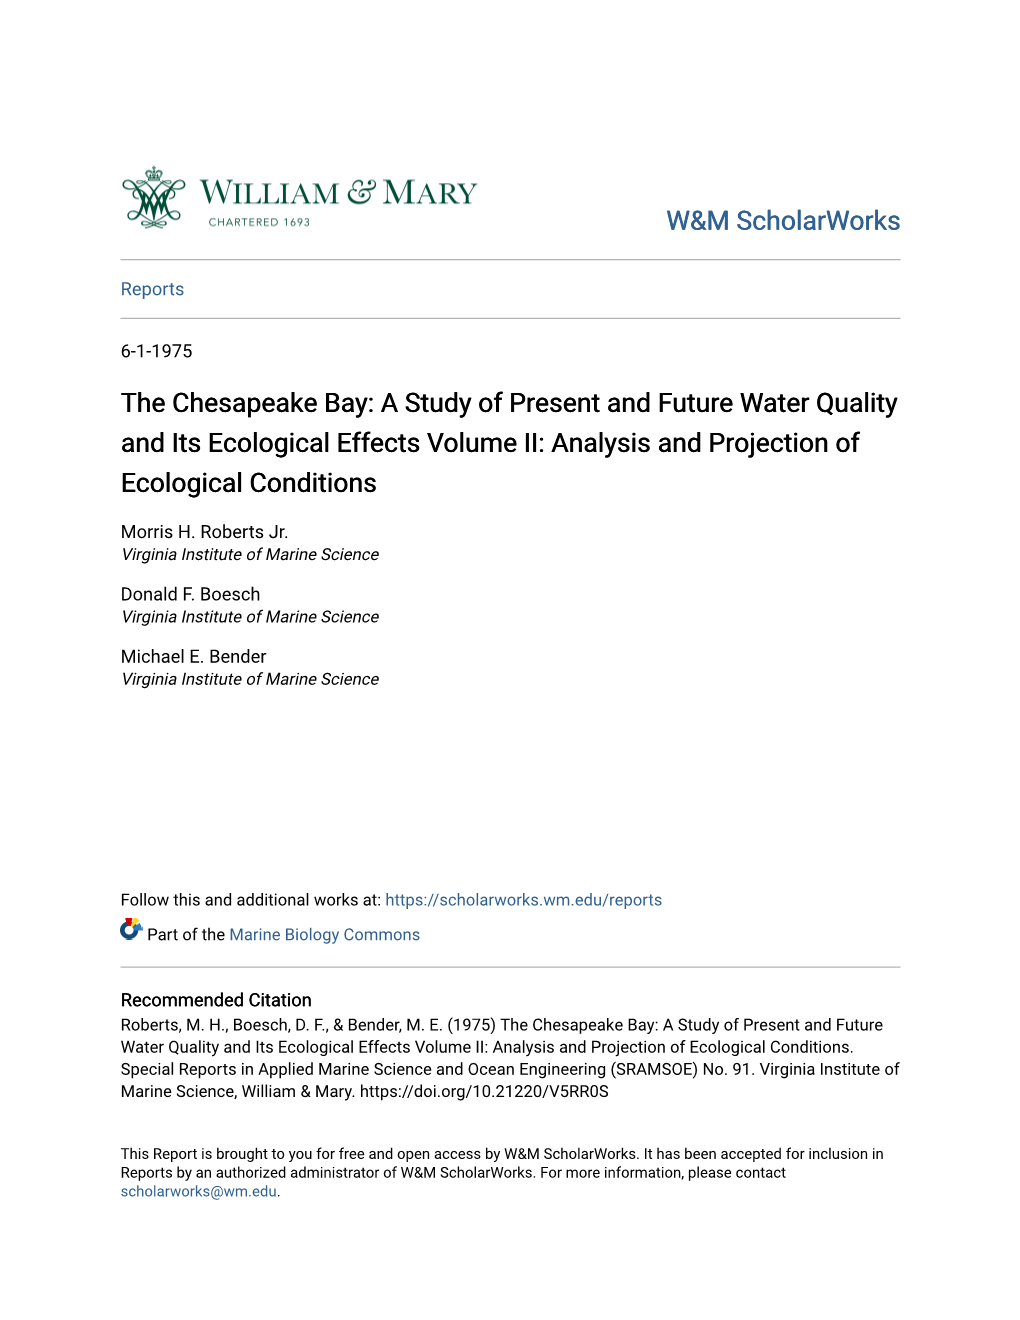 The Chesapeake Bay: a Study of Present and Future Water Quality and Its Ecological Effects Volume II: Analysis and Projection of Ecological Conditions